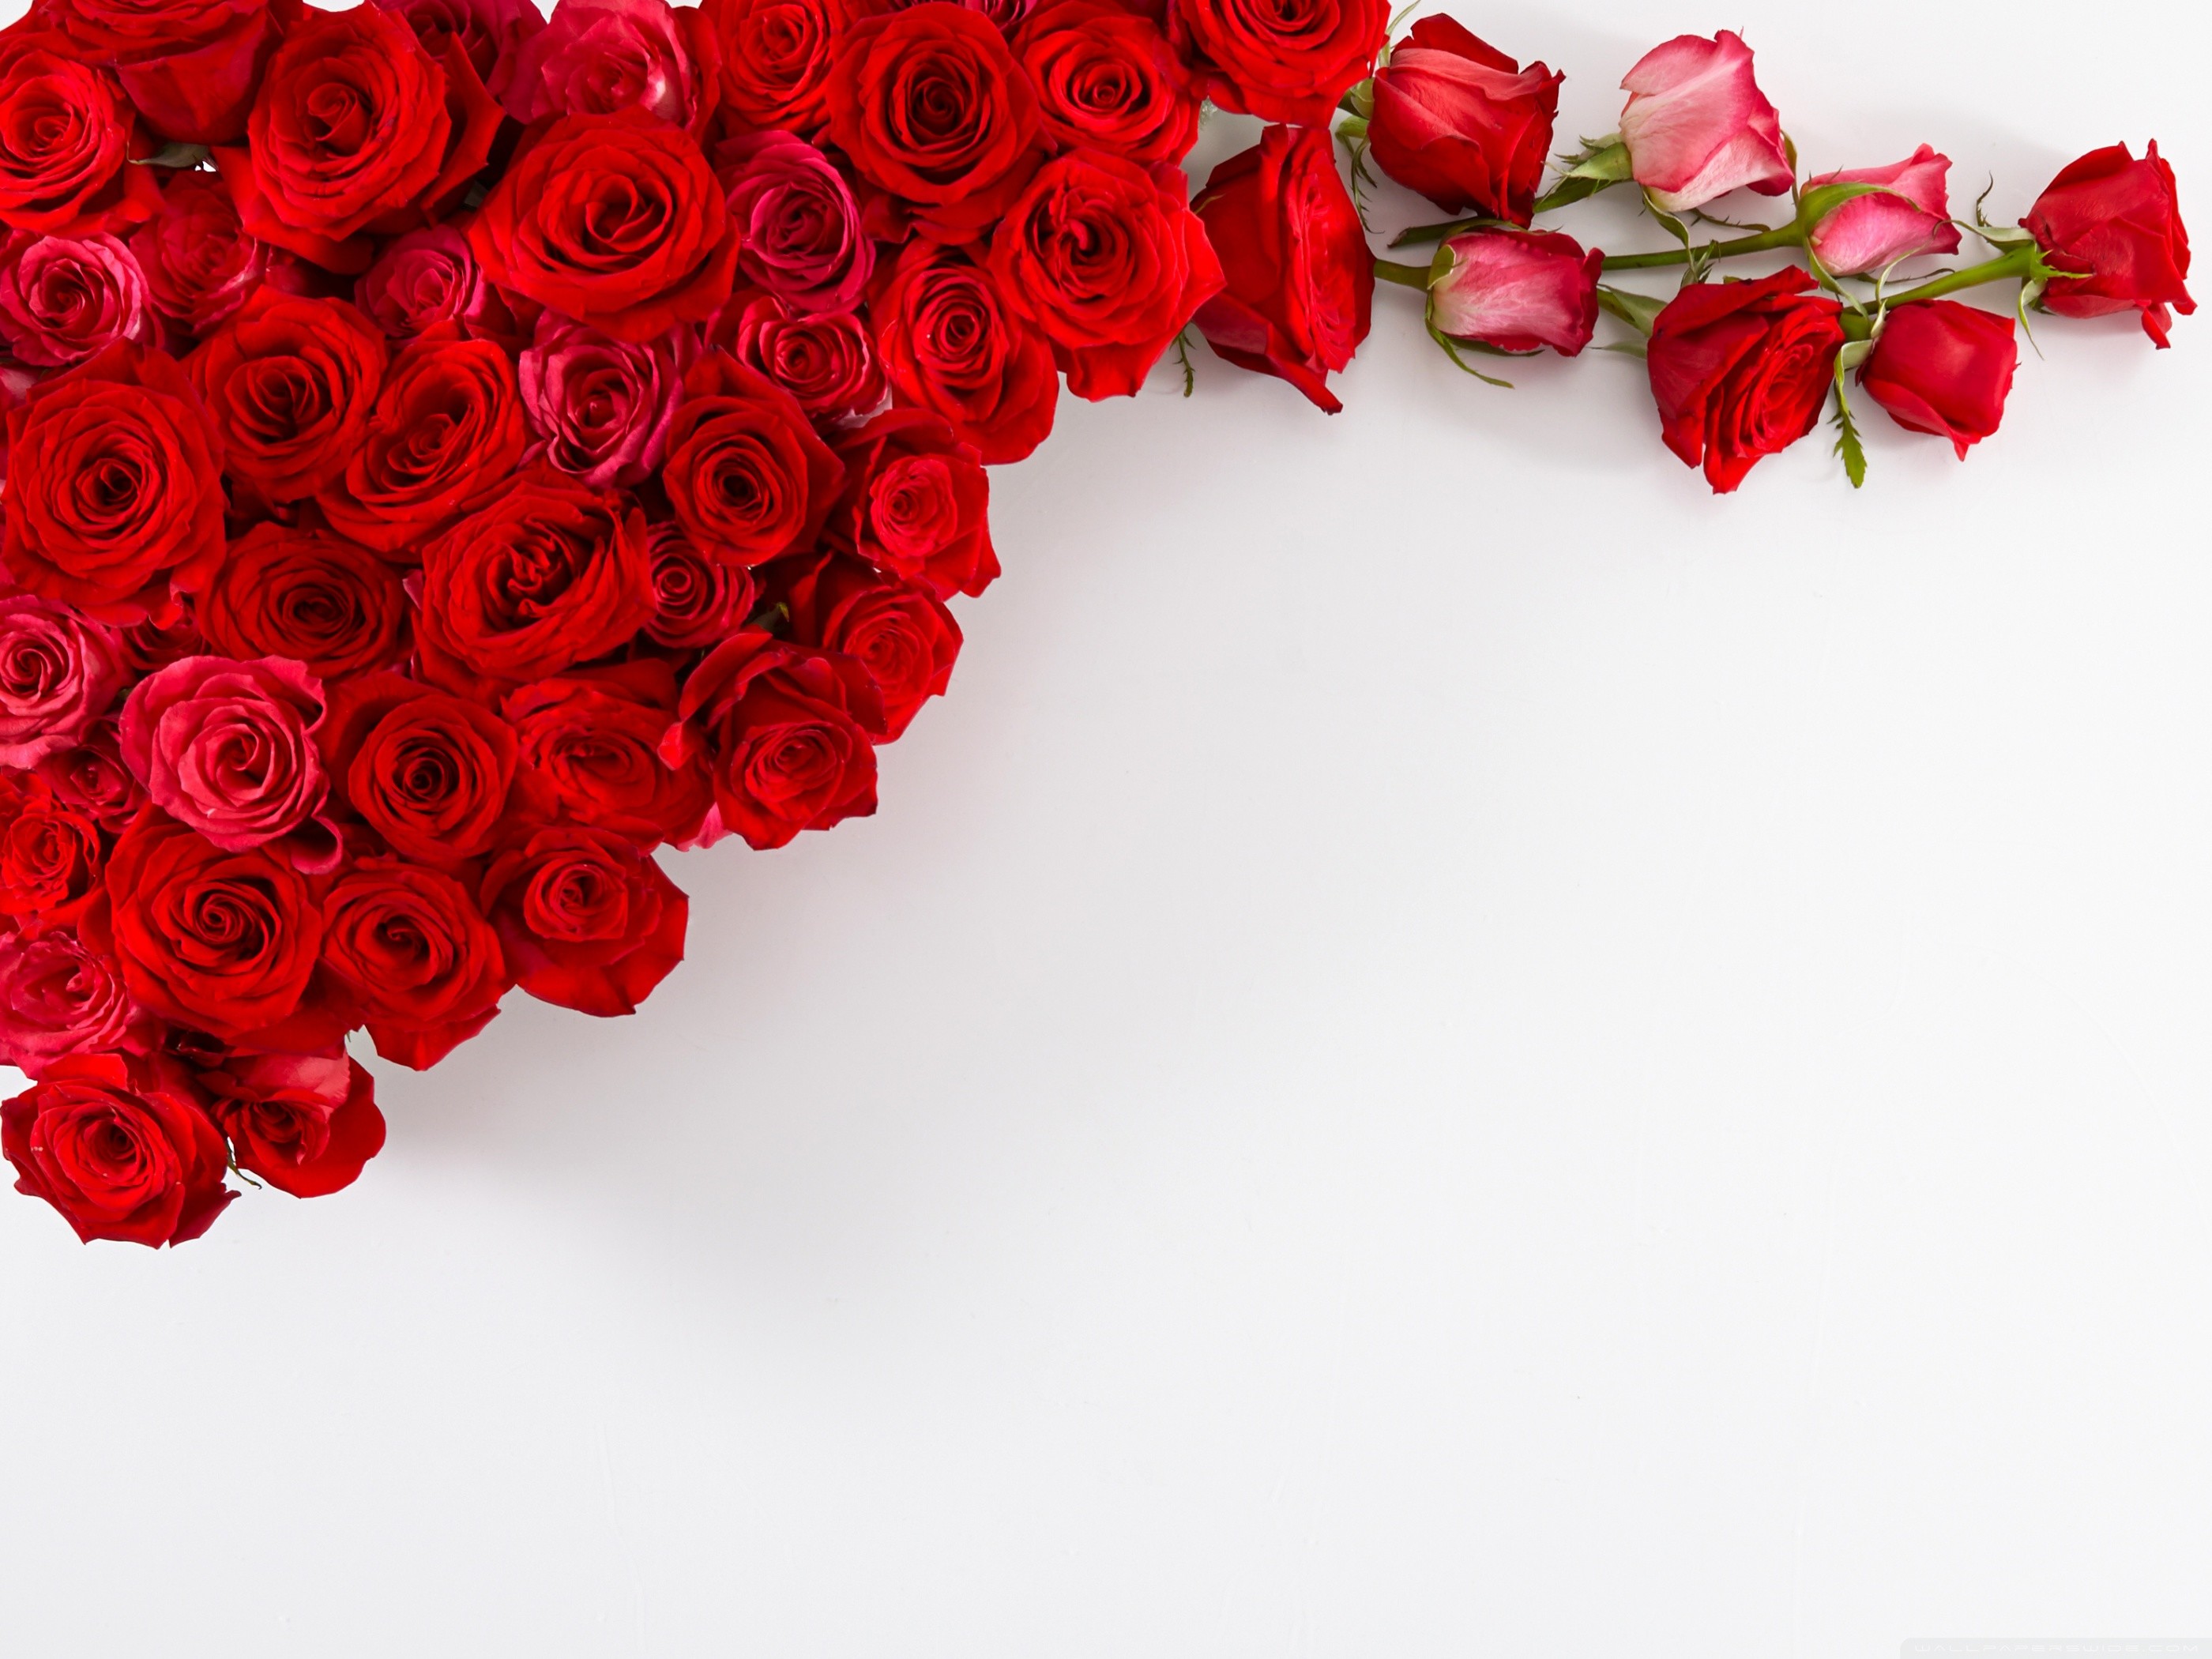 Standard Data Src Beautiful Red Roses Wallpaper For - High Resolution Red  Rose Background - 2800x2100 Wallpaper 